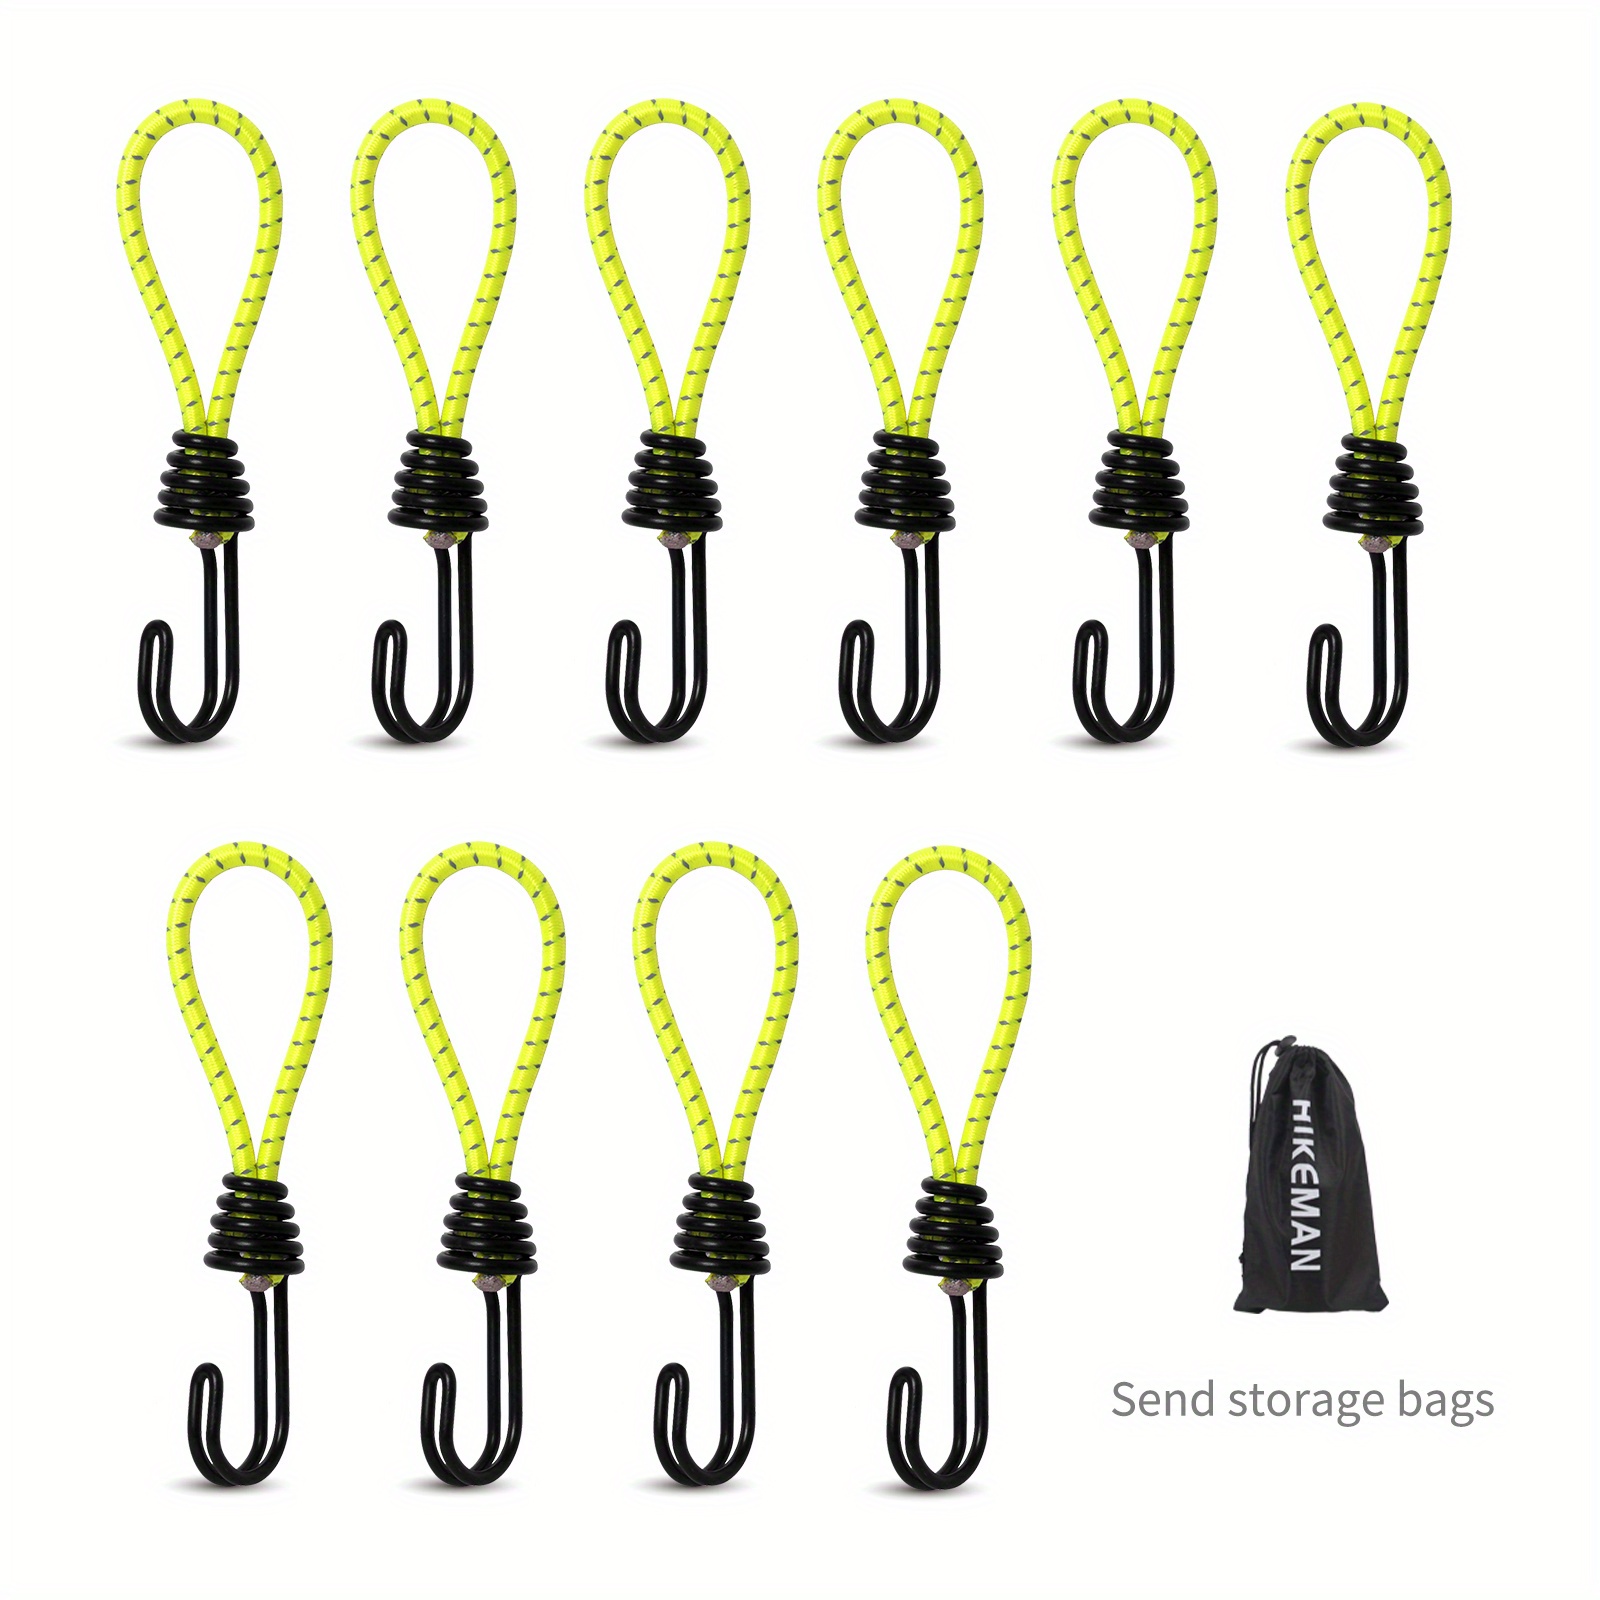 Spider Adjustable Bungee Cord with Hooks - Heavy Duty Tie Down Bungee  Straps for Automotive, Camping, Tarp, Outdoor, Bike Rack, Luggage and  Marine Use